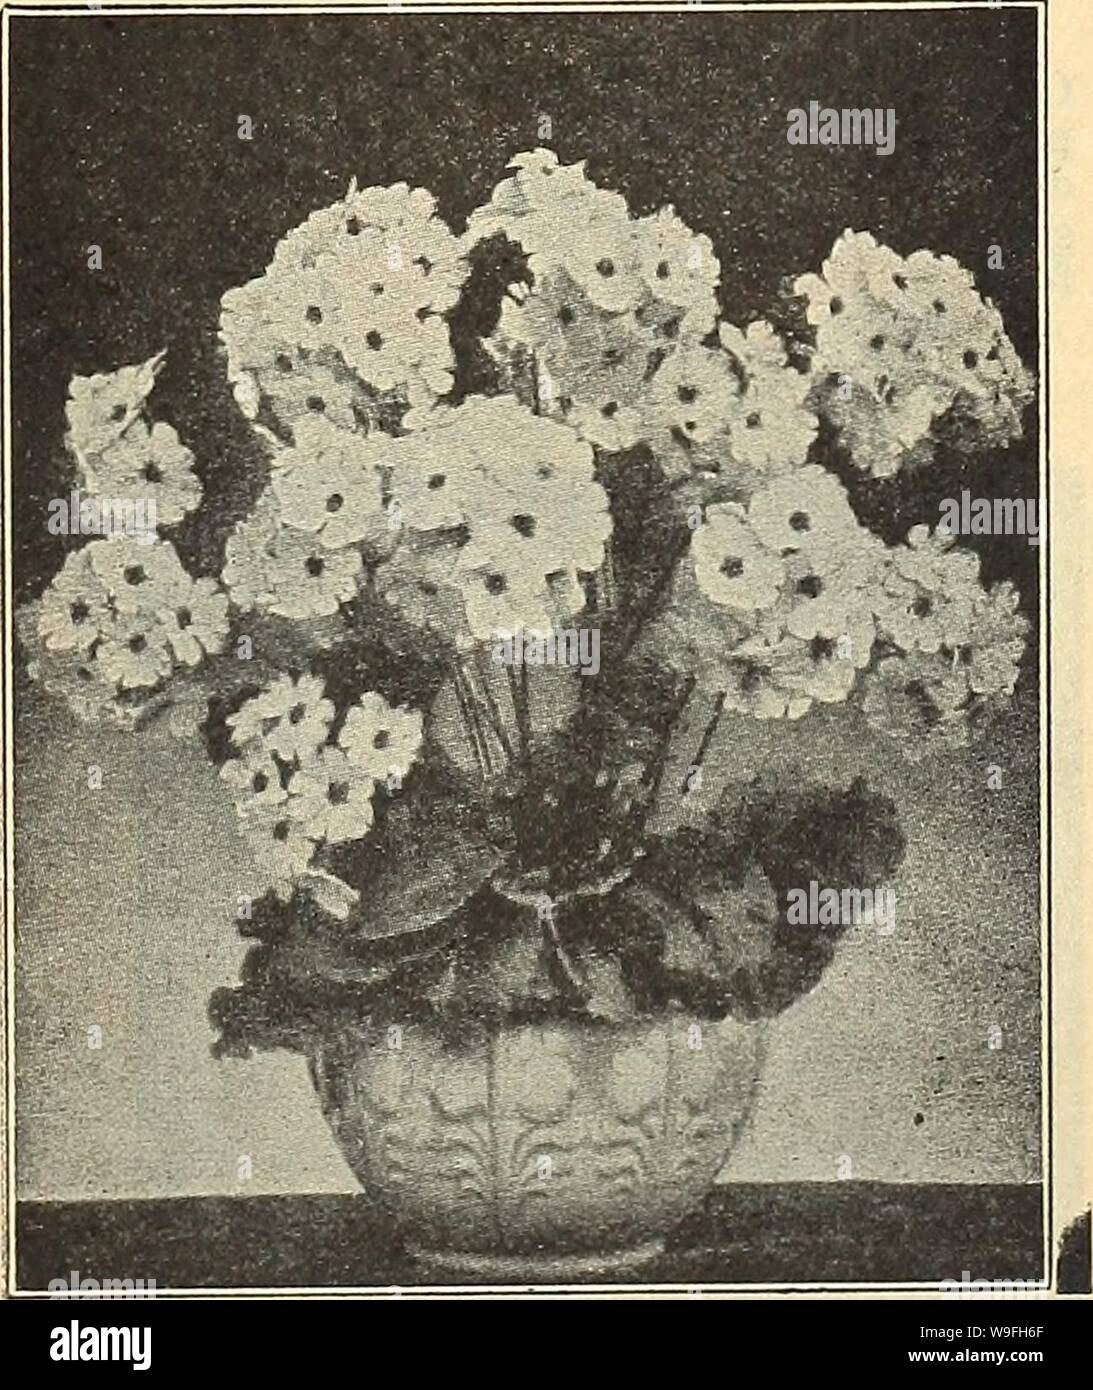 Archive image from page 42 of Currie's garden annual  63rd. Currie's garden annual : 63rd year spring 1938  curriesgardenann19curr 4 Year: 1938 ( Shirley Poppies    (For Perennial Primrose, see page Primula Obconica MALACOIDES A very pretty new Primula, somewhat like the dainty Baby Primrose, but much more sturdy. The flowers, a delicate shade of lav- ender, keep remarkably when cut and are very graceful. Will flower in 4 months from sow- ing. Pkt. 15c PYRETHRUM (Foliage Plant) AUREUM GOLDEN FEATHER — 6 inches. One of the best plants for edging; grown for its beautiful yellow foliage. Most suc Stock Photo